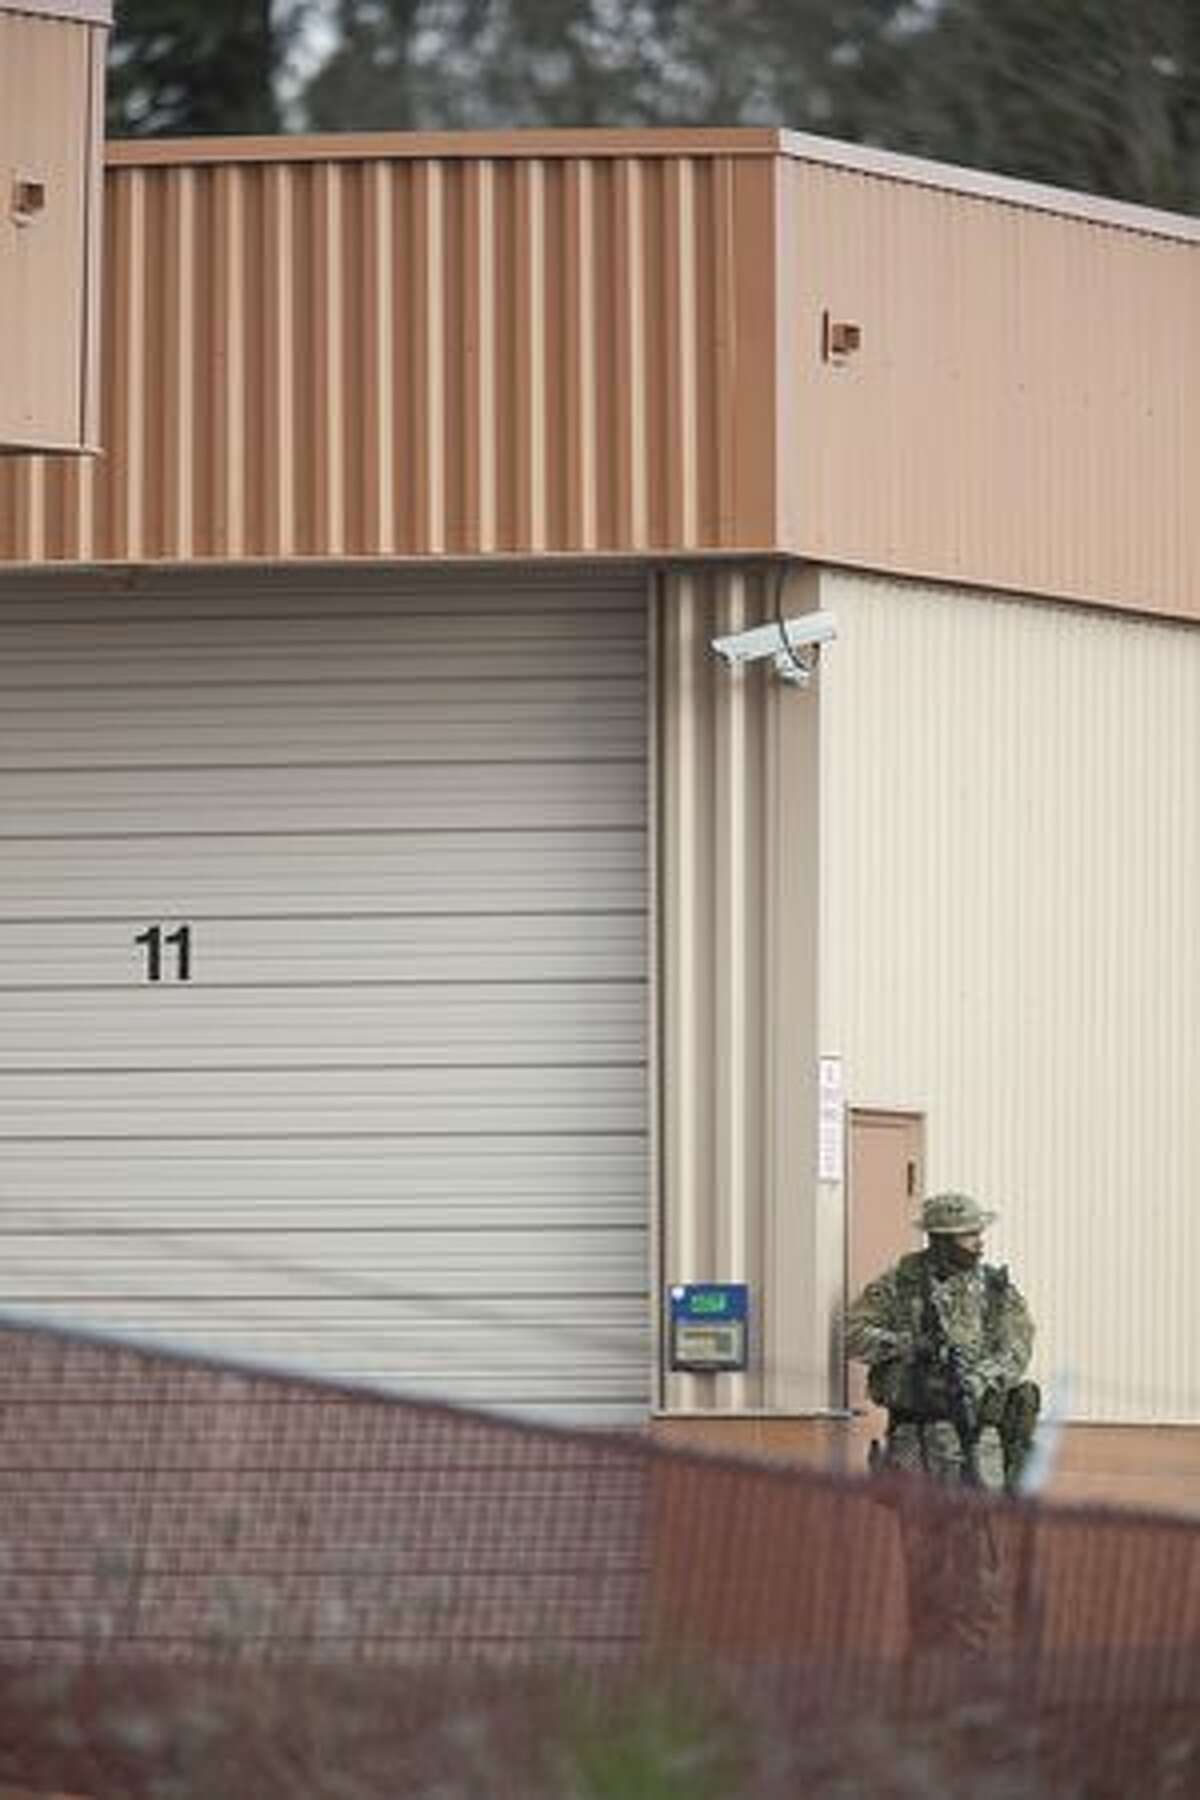 A SWAT team member takes part in the search of storage units near where four Lakewood Police Officers were killed Sunday near Lakewood. A gunman shot and killed four Lakewood Police Officers in a Forza Coffee Company shop Sunday morning in what authorities are describing as a targeted attack.